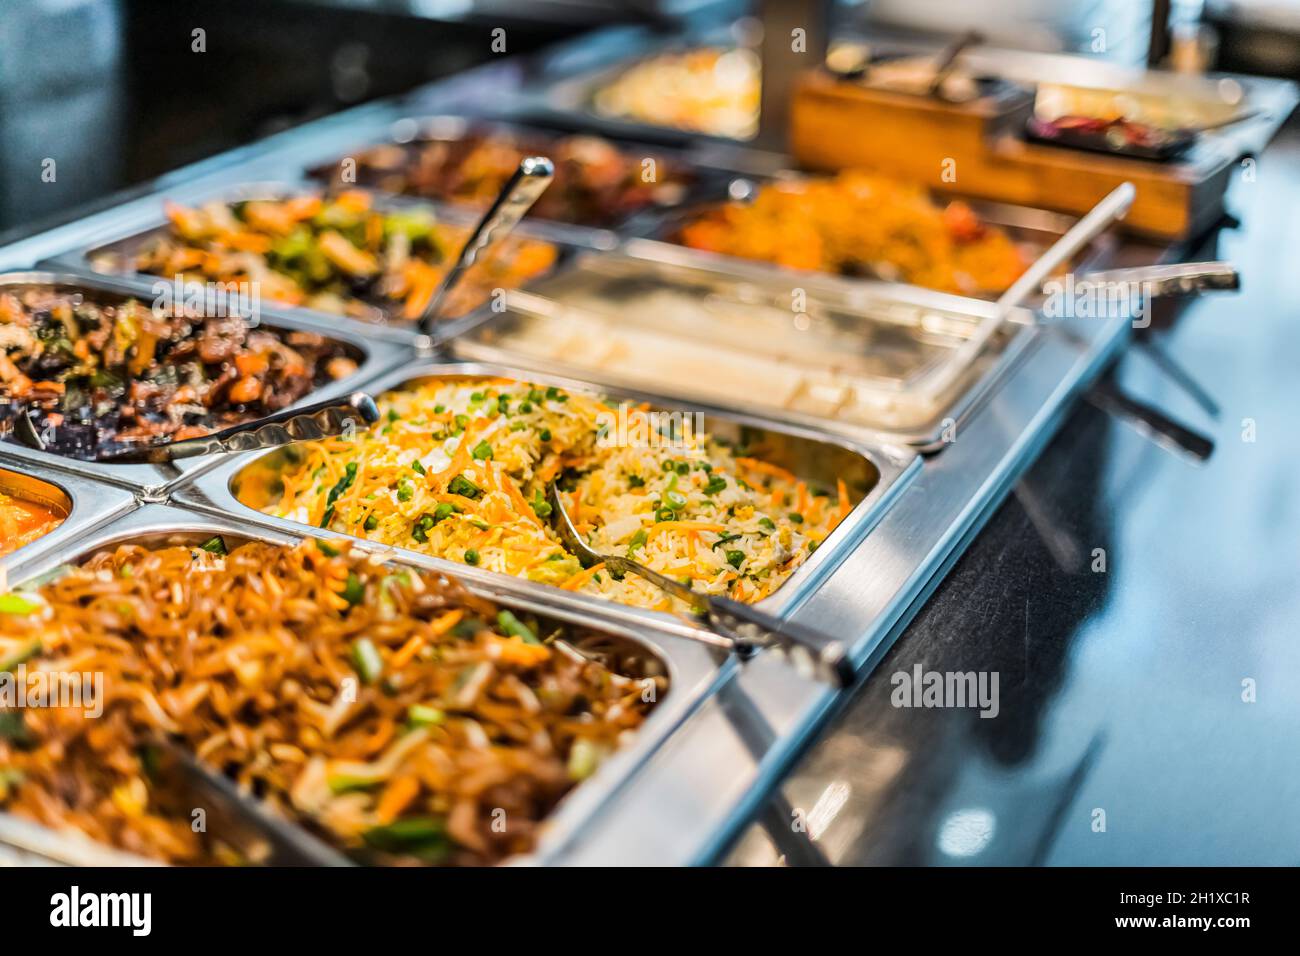 Traditional Asian food sold in an European shopping mall food court Stock Photo